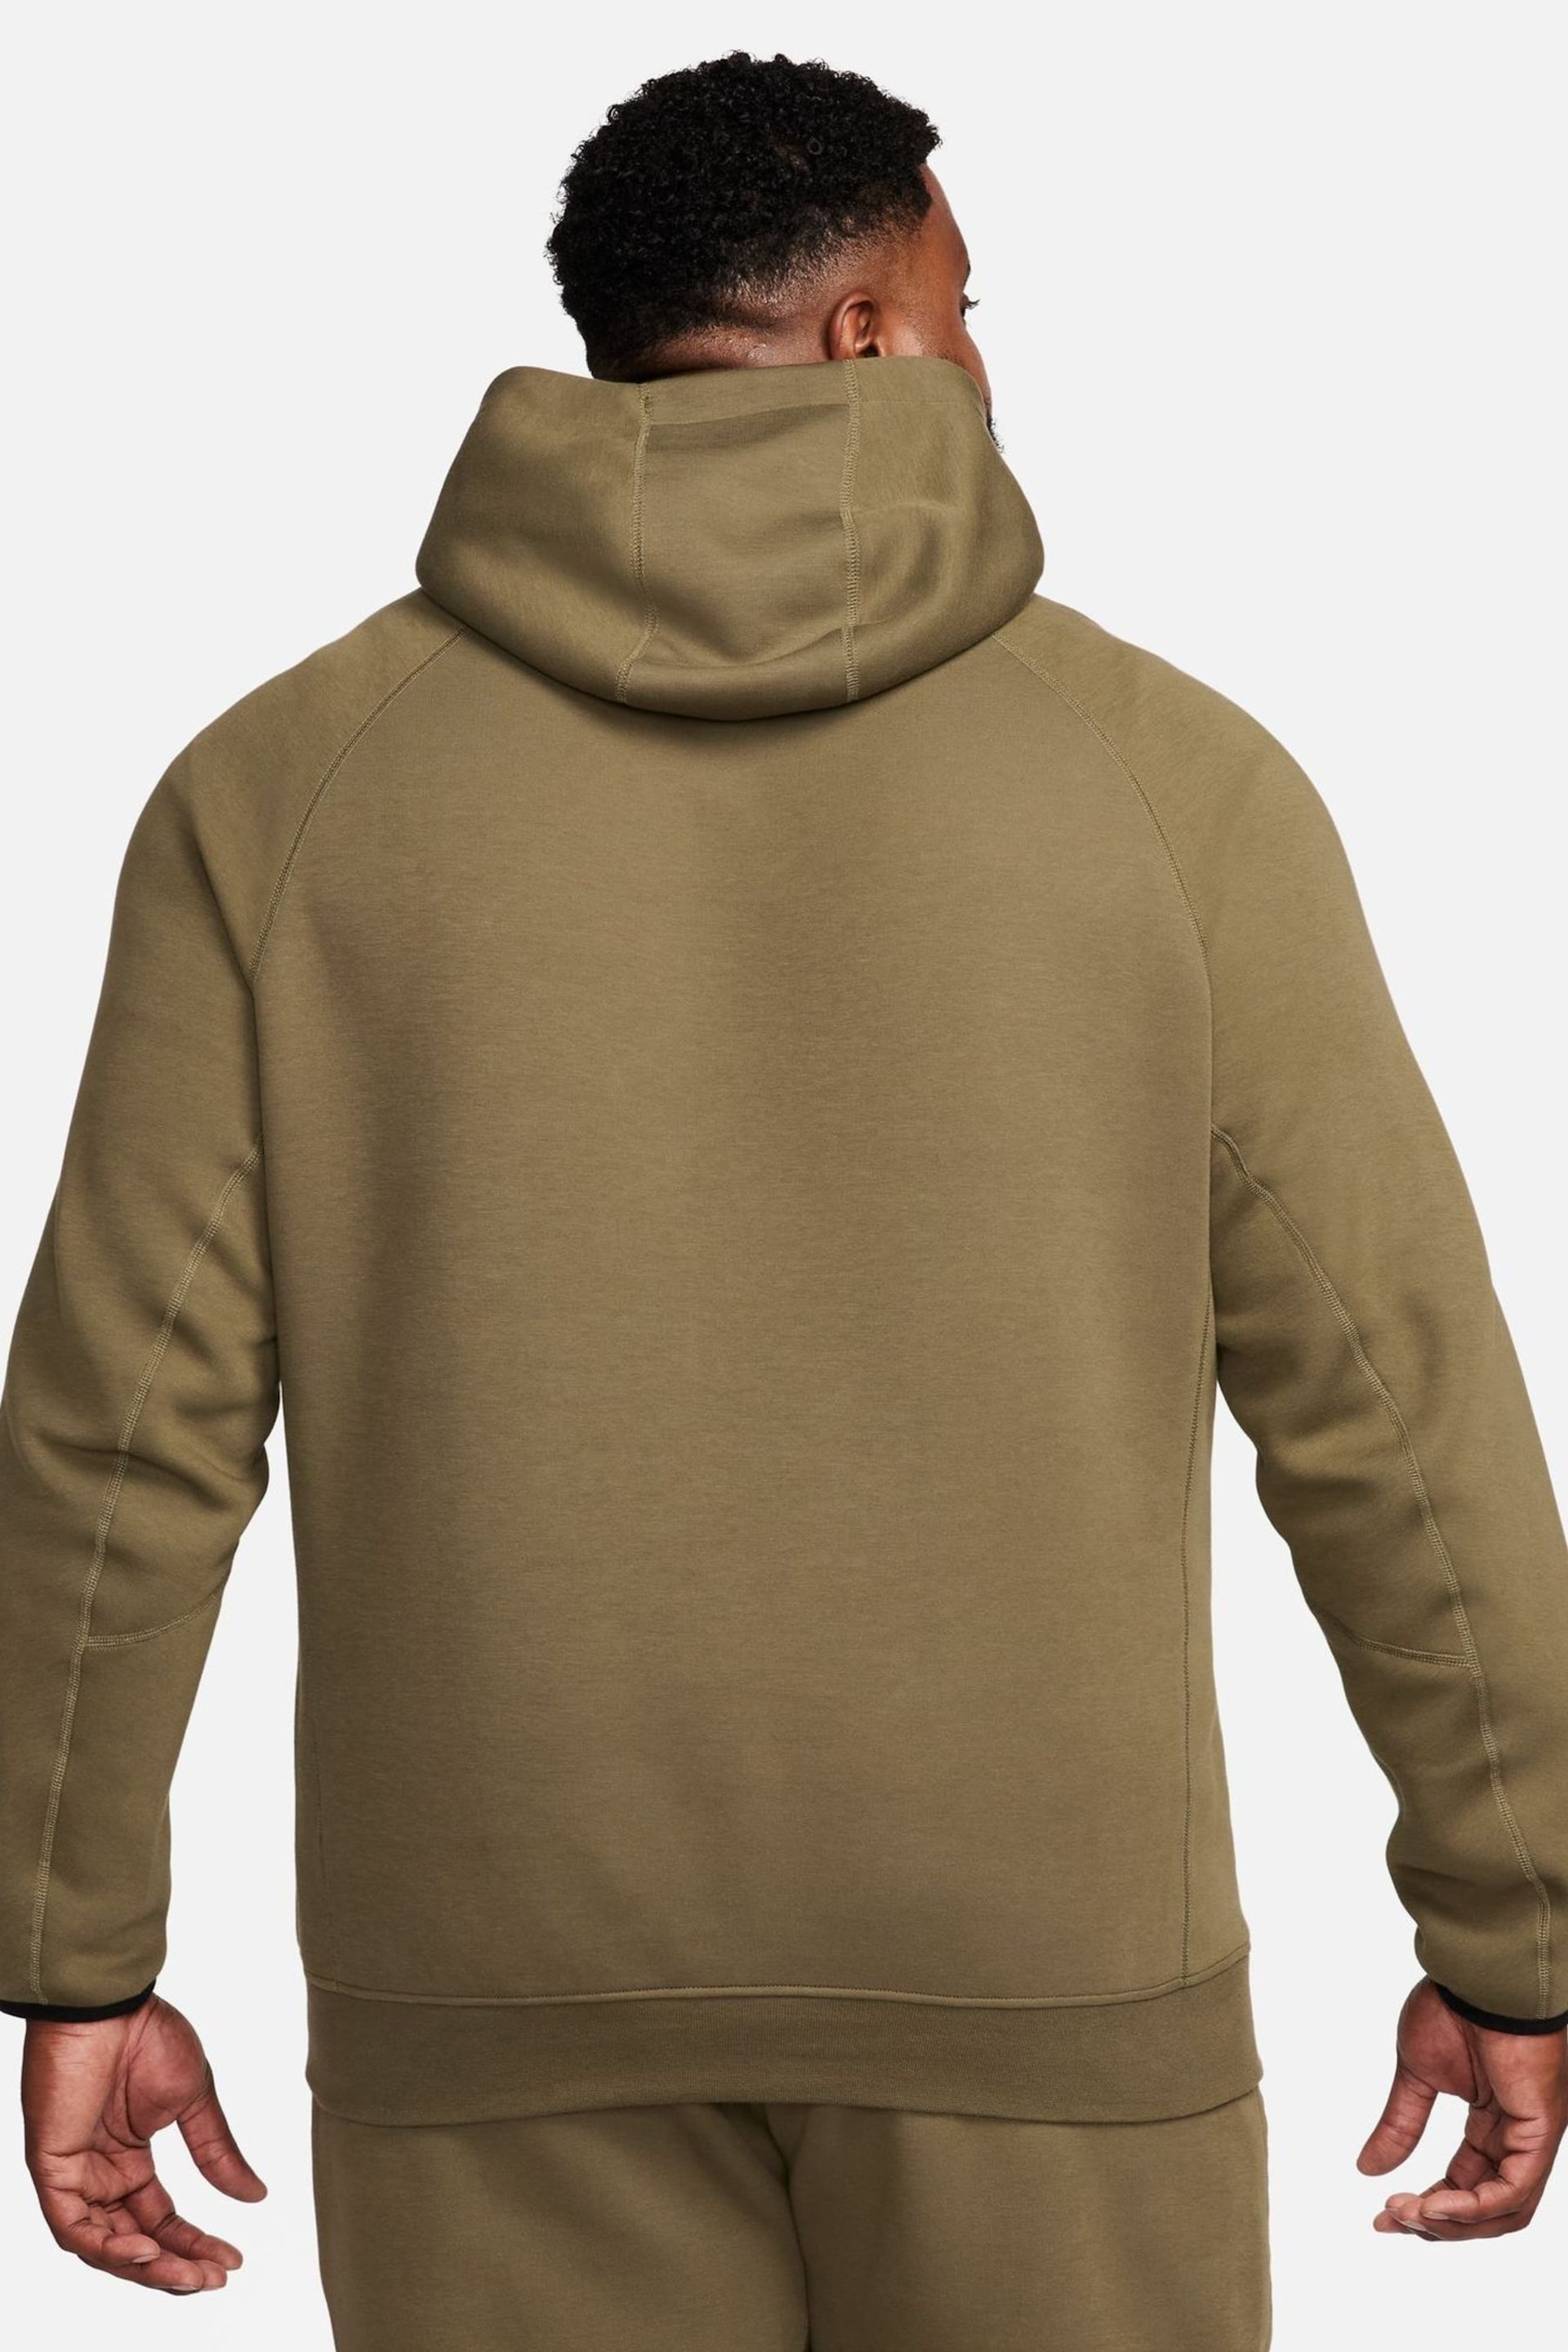 Nike Olive Green Tech Fleece Pullover Hoodie - Image 5 of 17